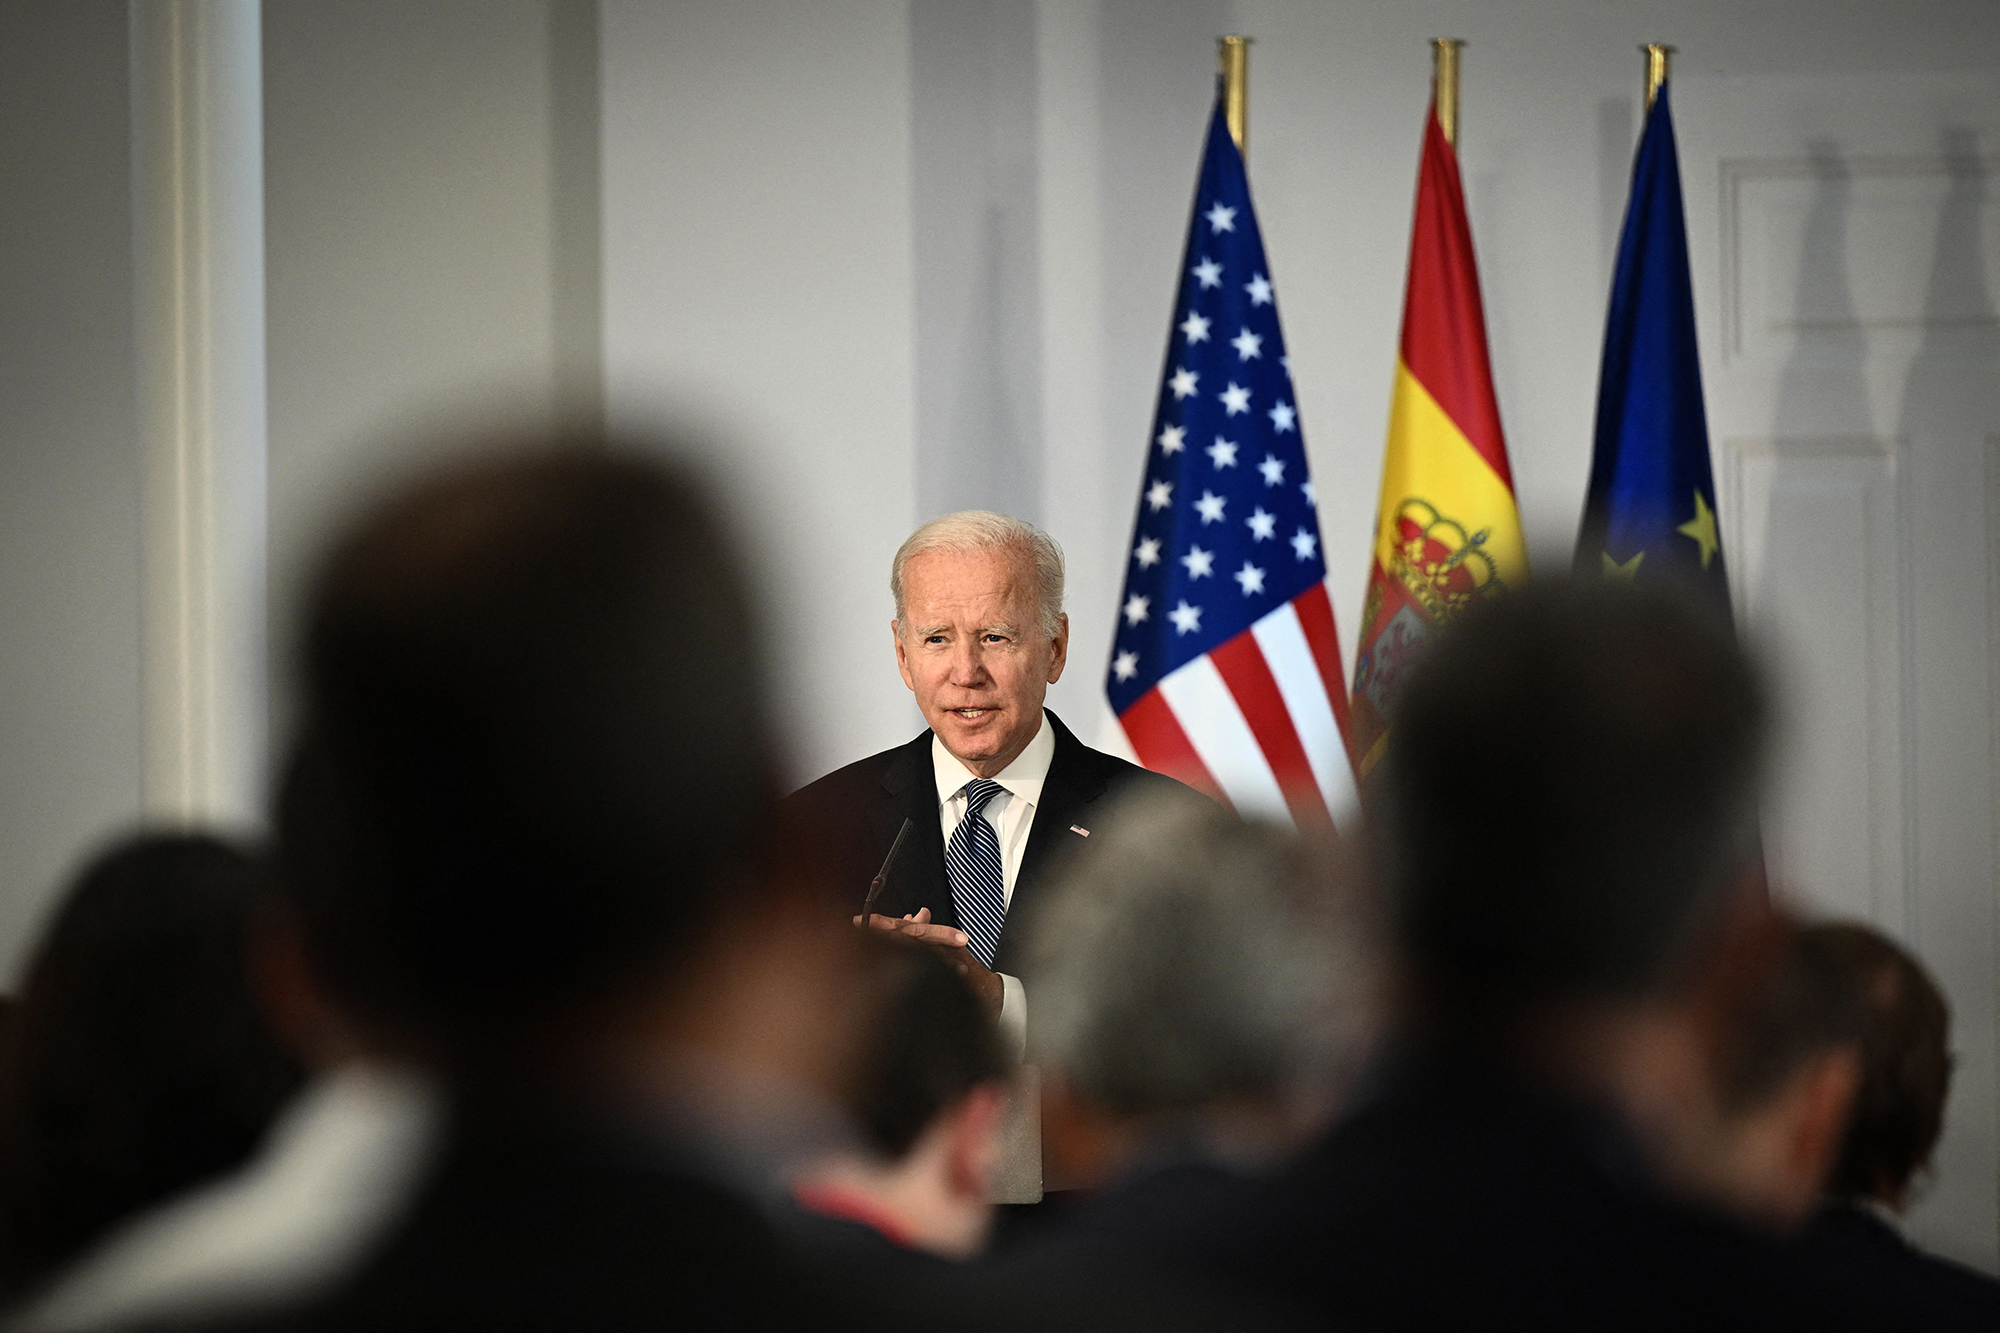 US President Joe Biden speaks during a joint press conference with Spain's Prime Minister after a meeting at La Moncloa Palace in Madrid, Spain, on the sidelines of a summit of The North Atlantic Treaty Organisation (NATO) on June 28.